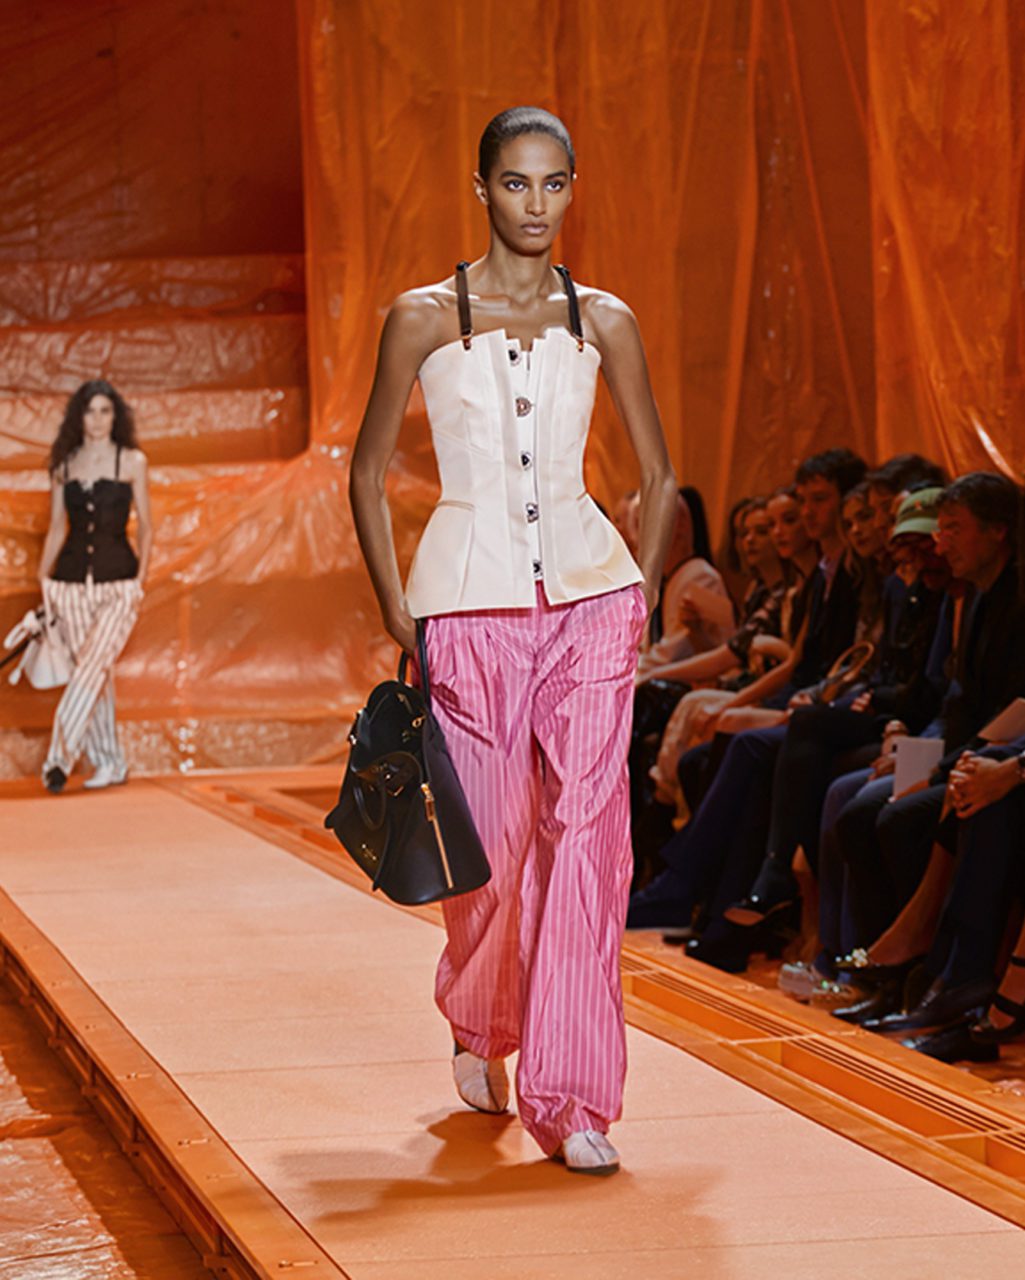 Louis Vuitton Bags and Shoes for Summer 2023 - RUNWAY MAGAZINE